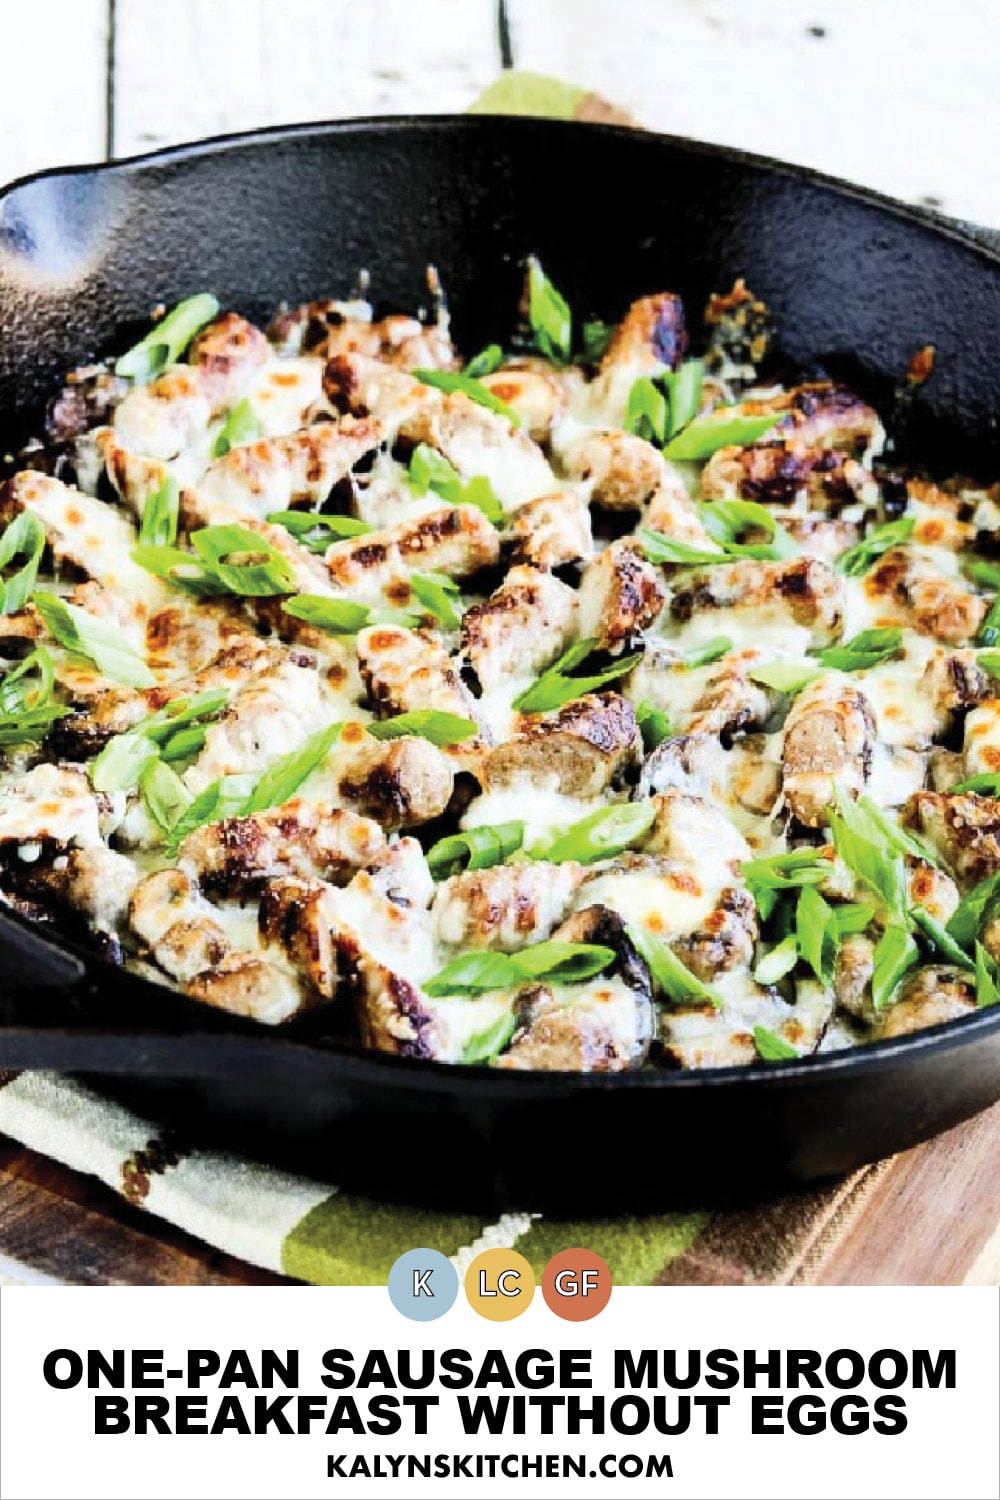 Pinterest image of One-Pan Sausage Mushroom Breakfast without Eggs